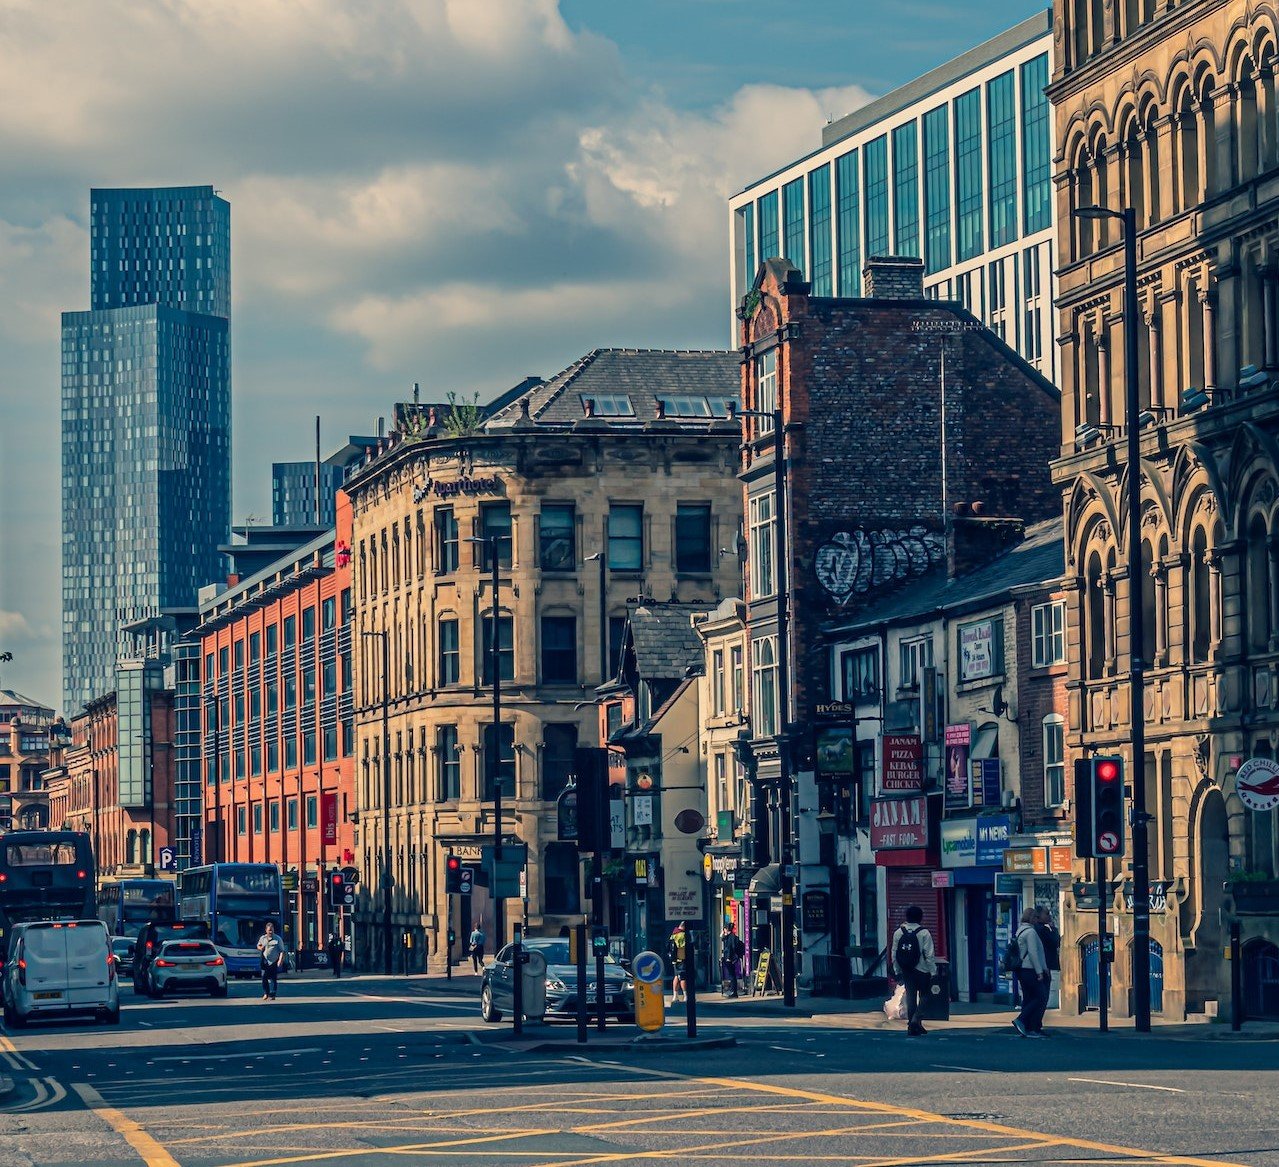 Moving To Manchester? Here's Some Advice